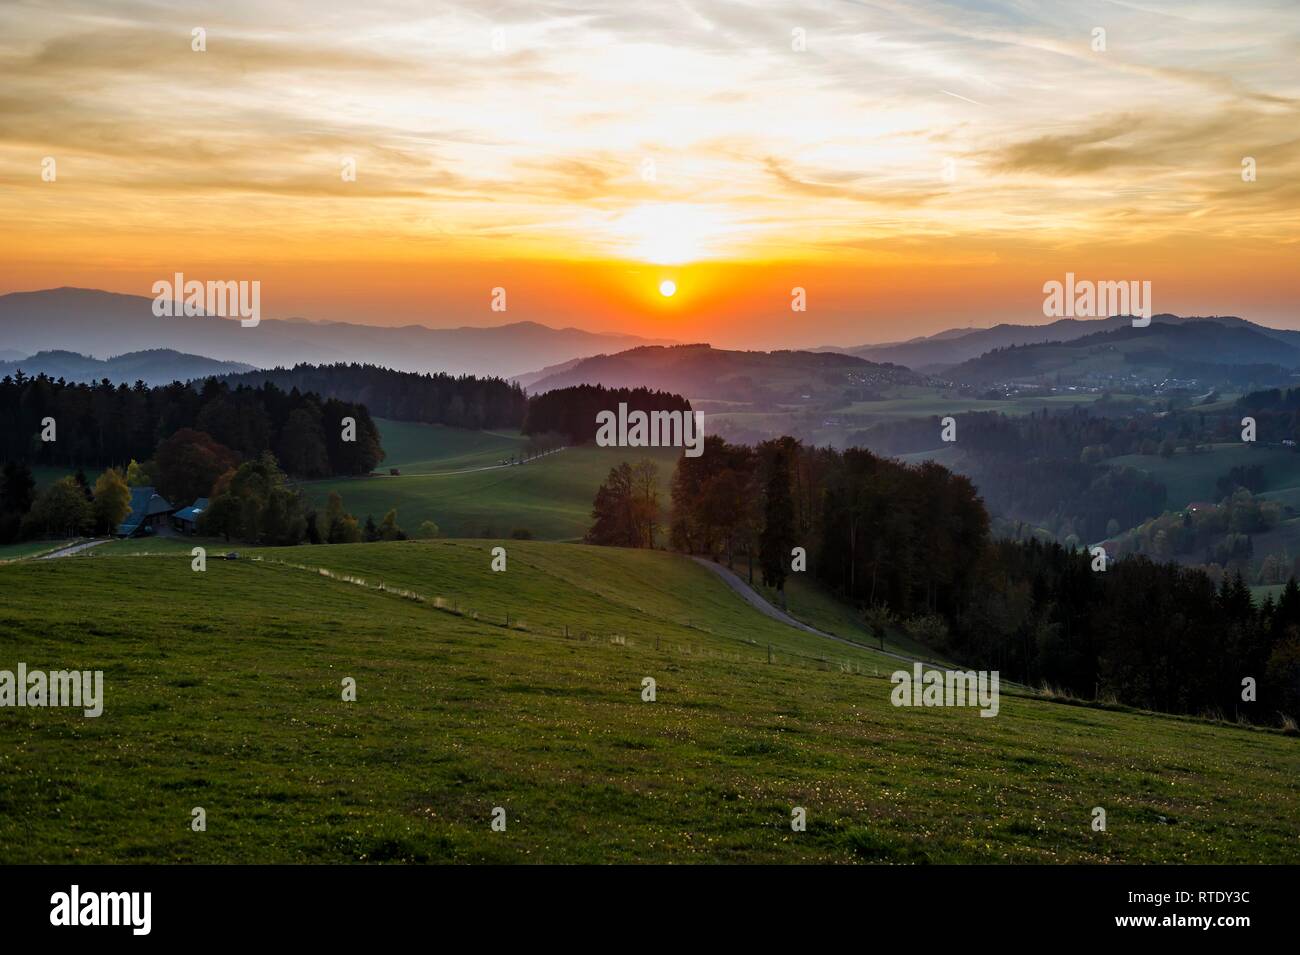 View of hilly landscape in autumn, sunset, near St Märgen, Black Forest, Baden-Württemberg, Germany Stock Photo